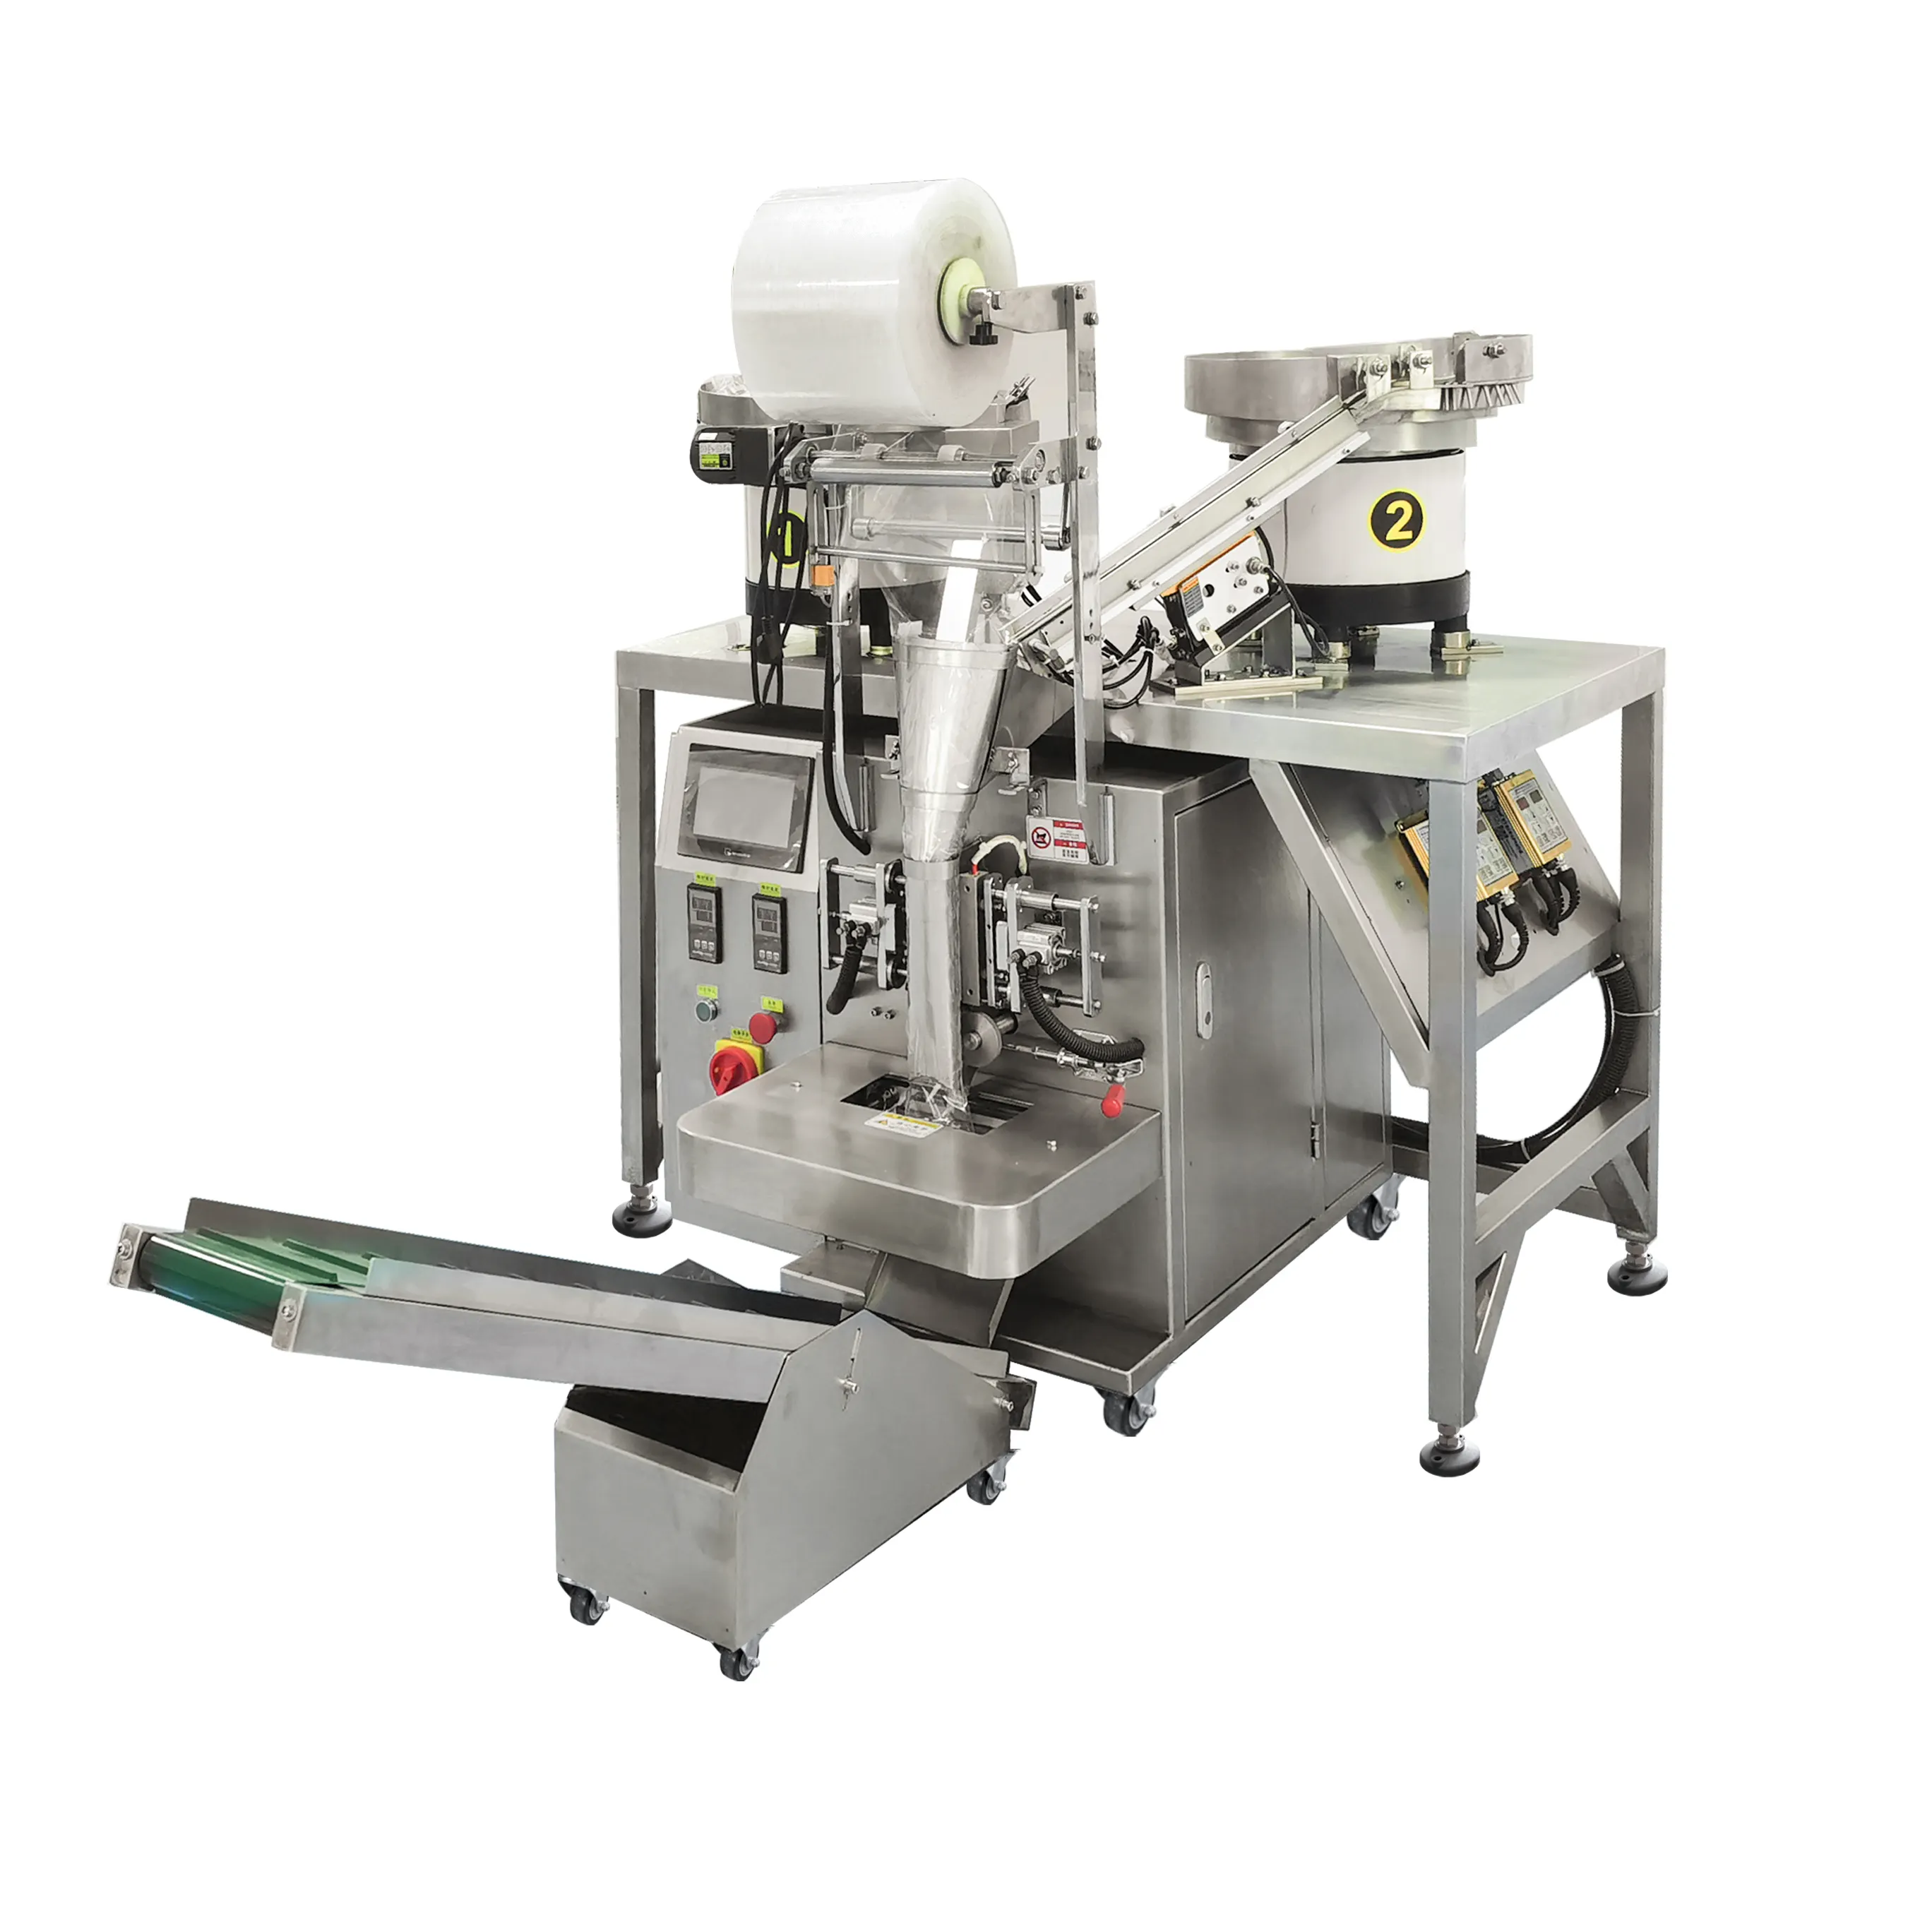 Automatic Vibration counting packing machine for screw nuts bolt assembling small parts